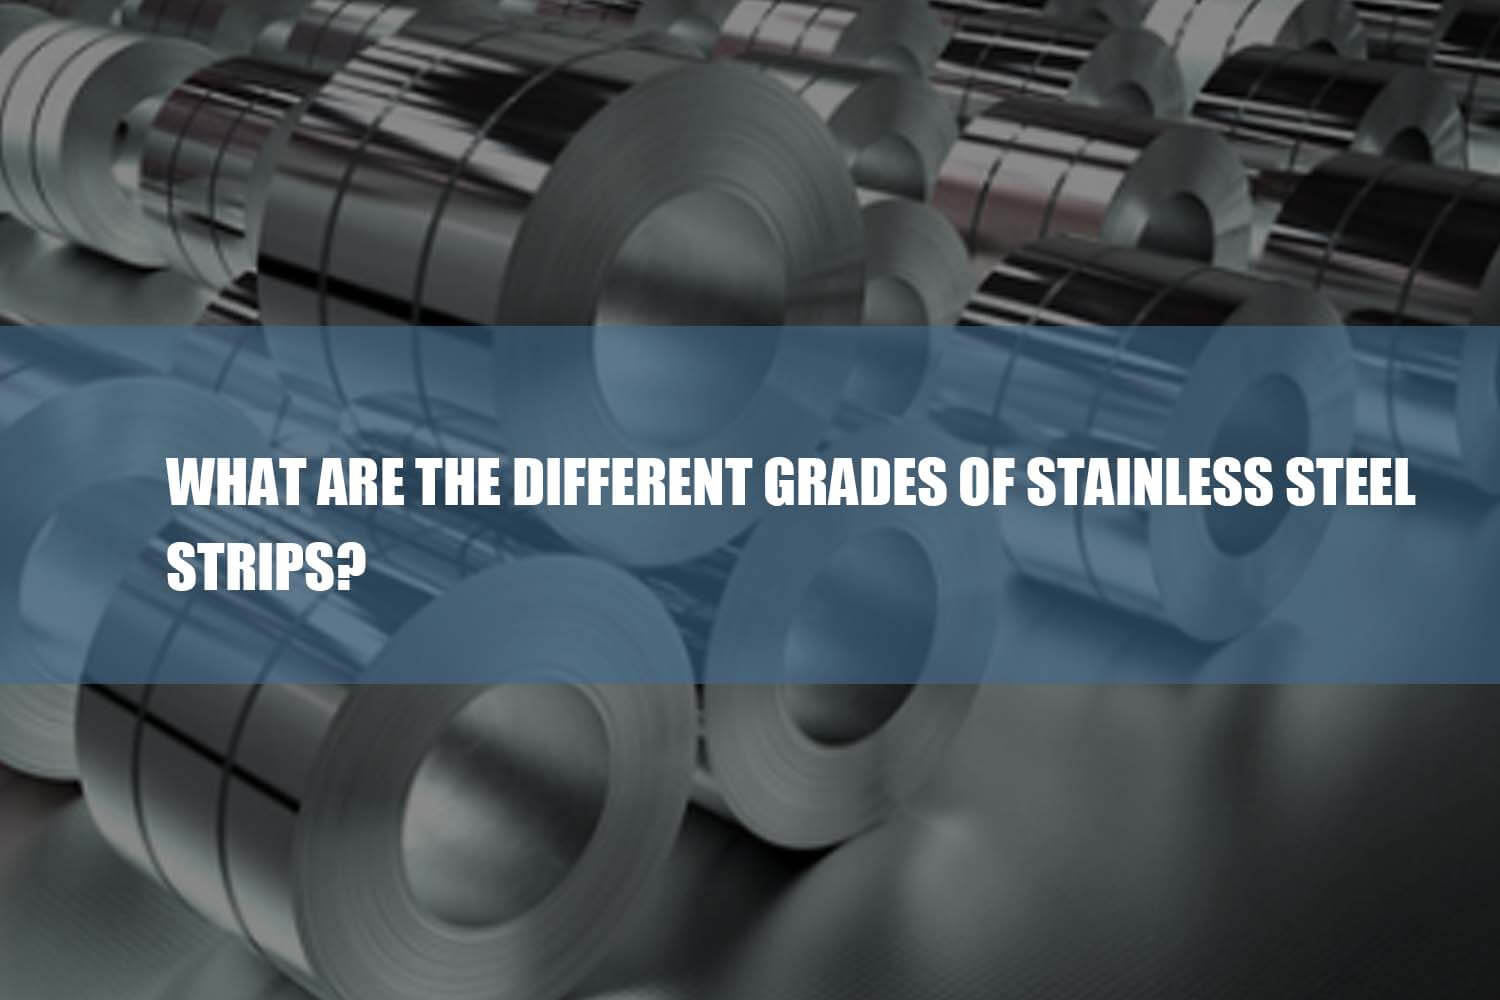 the different grades of stainless steel strips